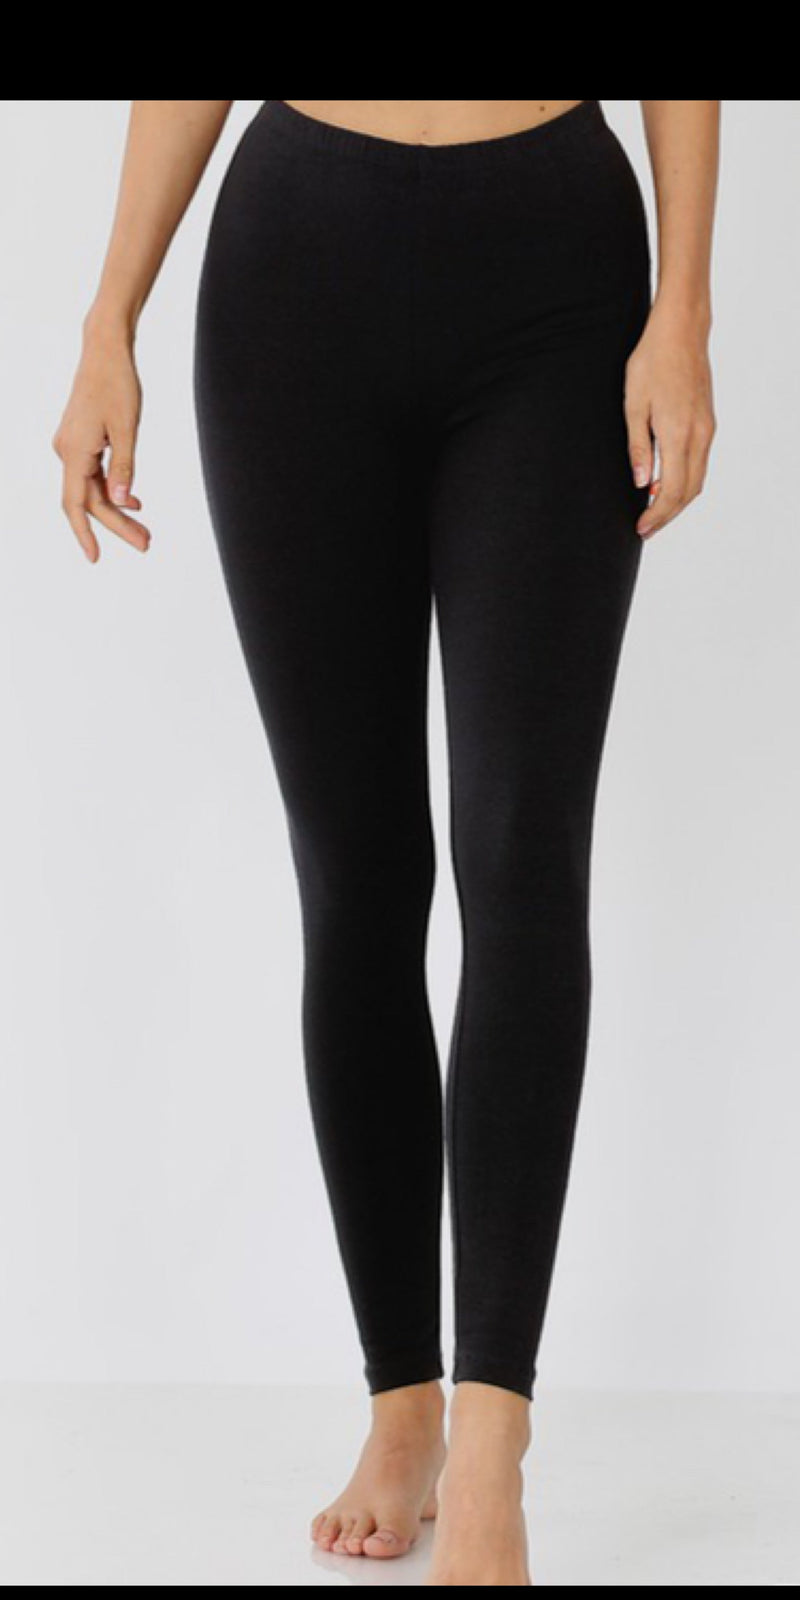 Black Solid Cotton Leggings - Also in Plus Size – Gypsy Ranch Boutique